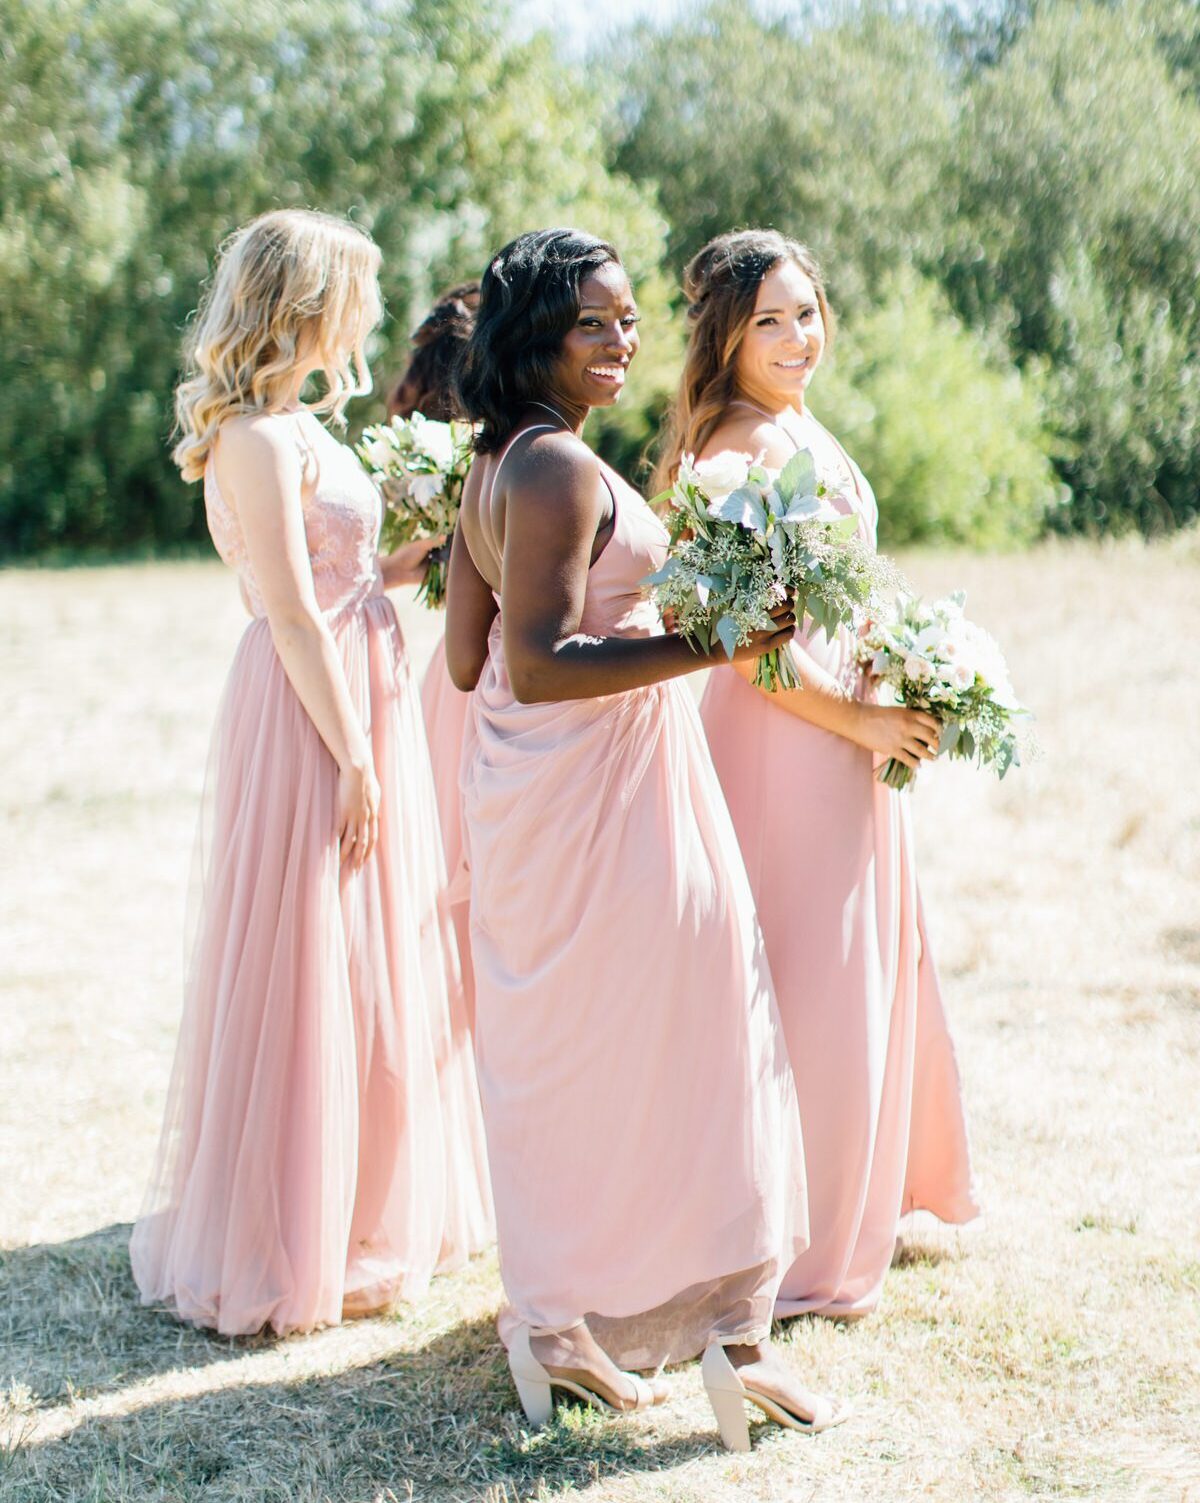 Holland ranch wedding by edna valley photographer jessica sofranko